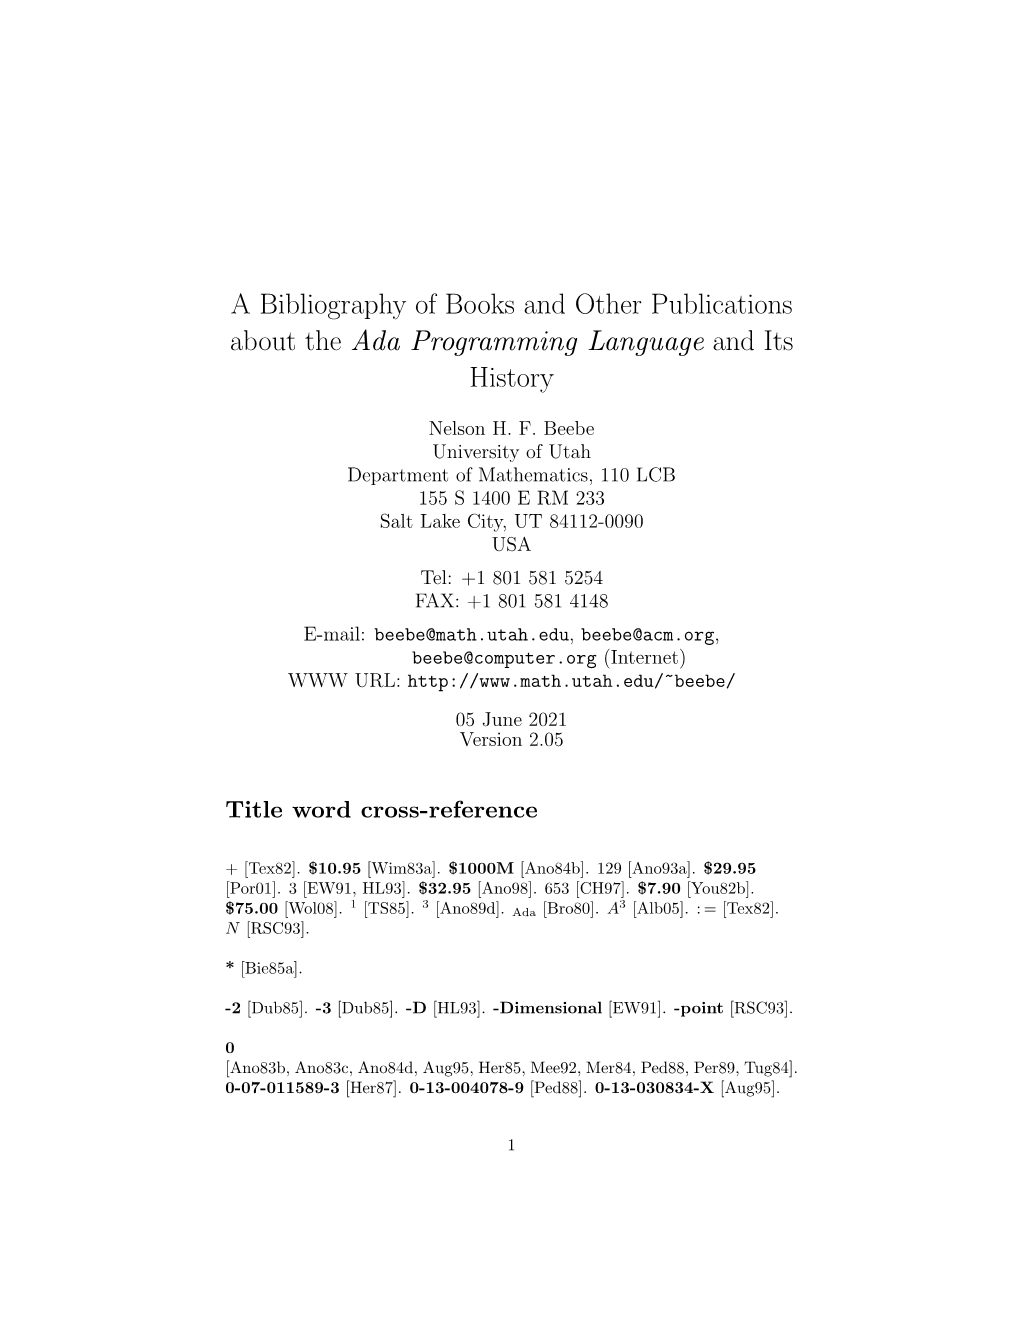 A Bibliography of Books and Other Publications About the Ada Programming Language and Its History